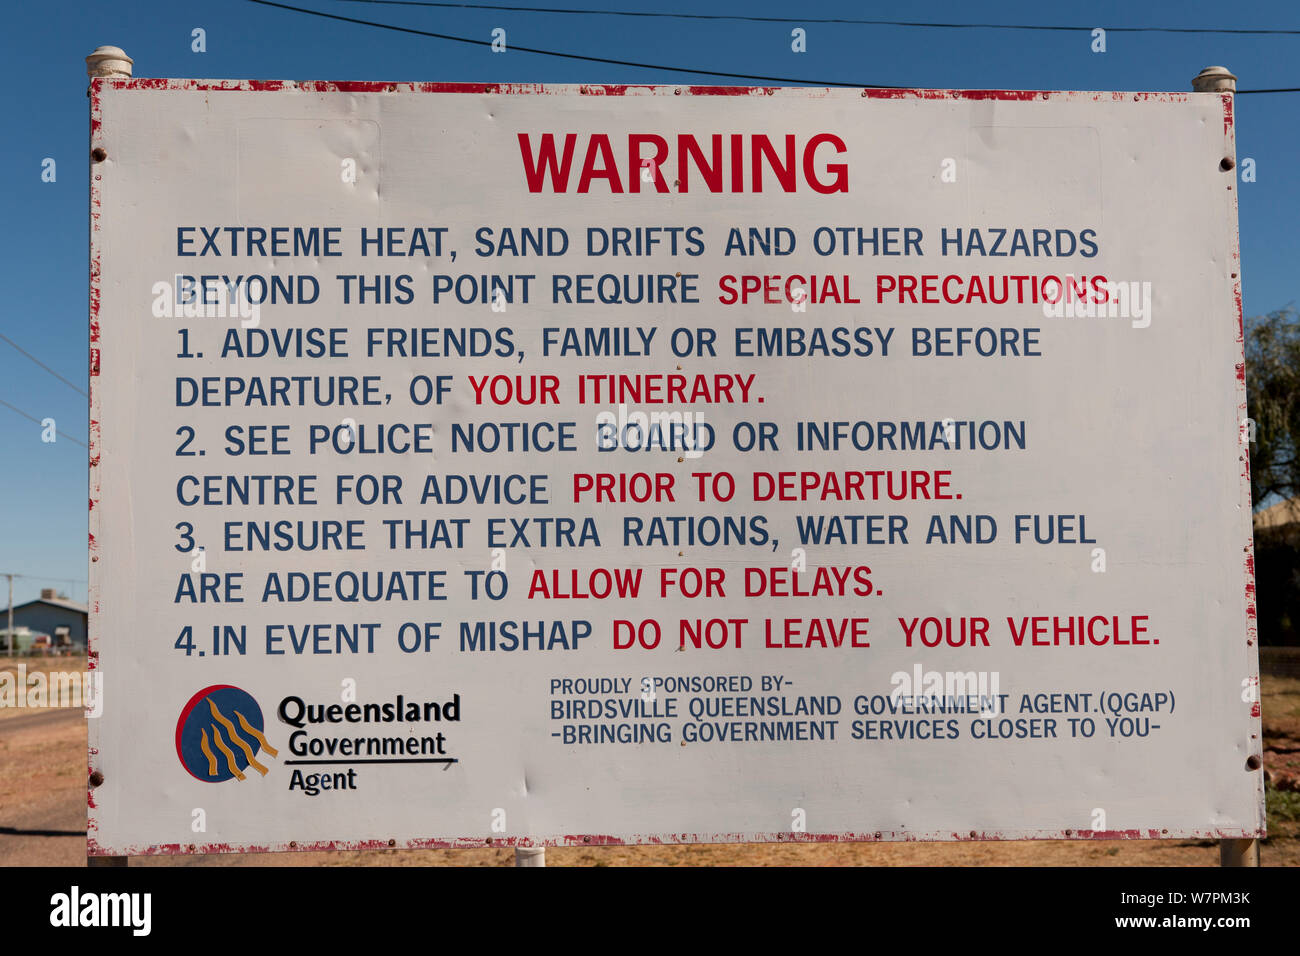 Queensland Government Warning for travelers going to the Simpson Desert, Queensland, Australia Stock Photo